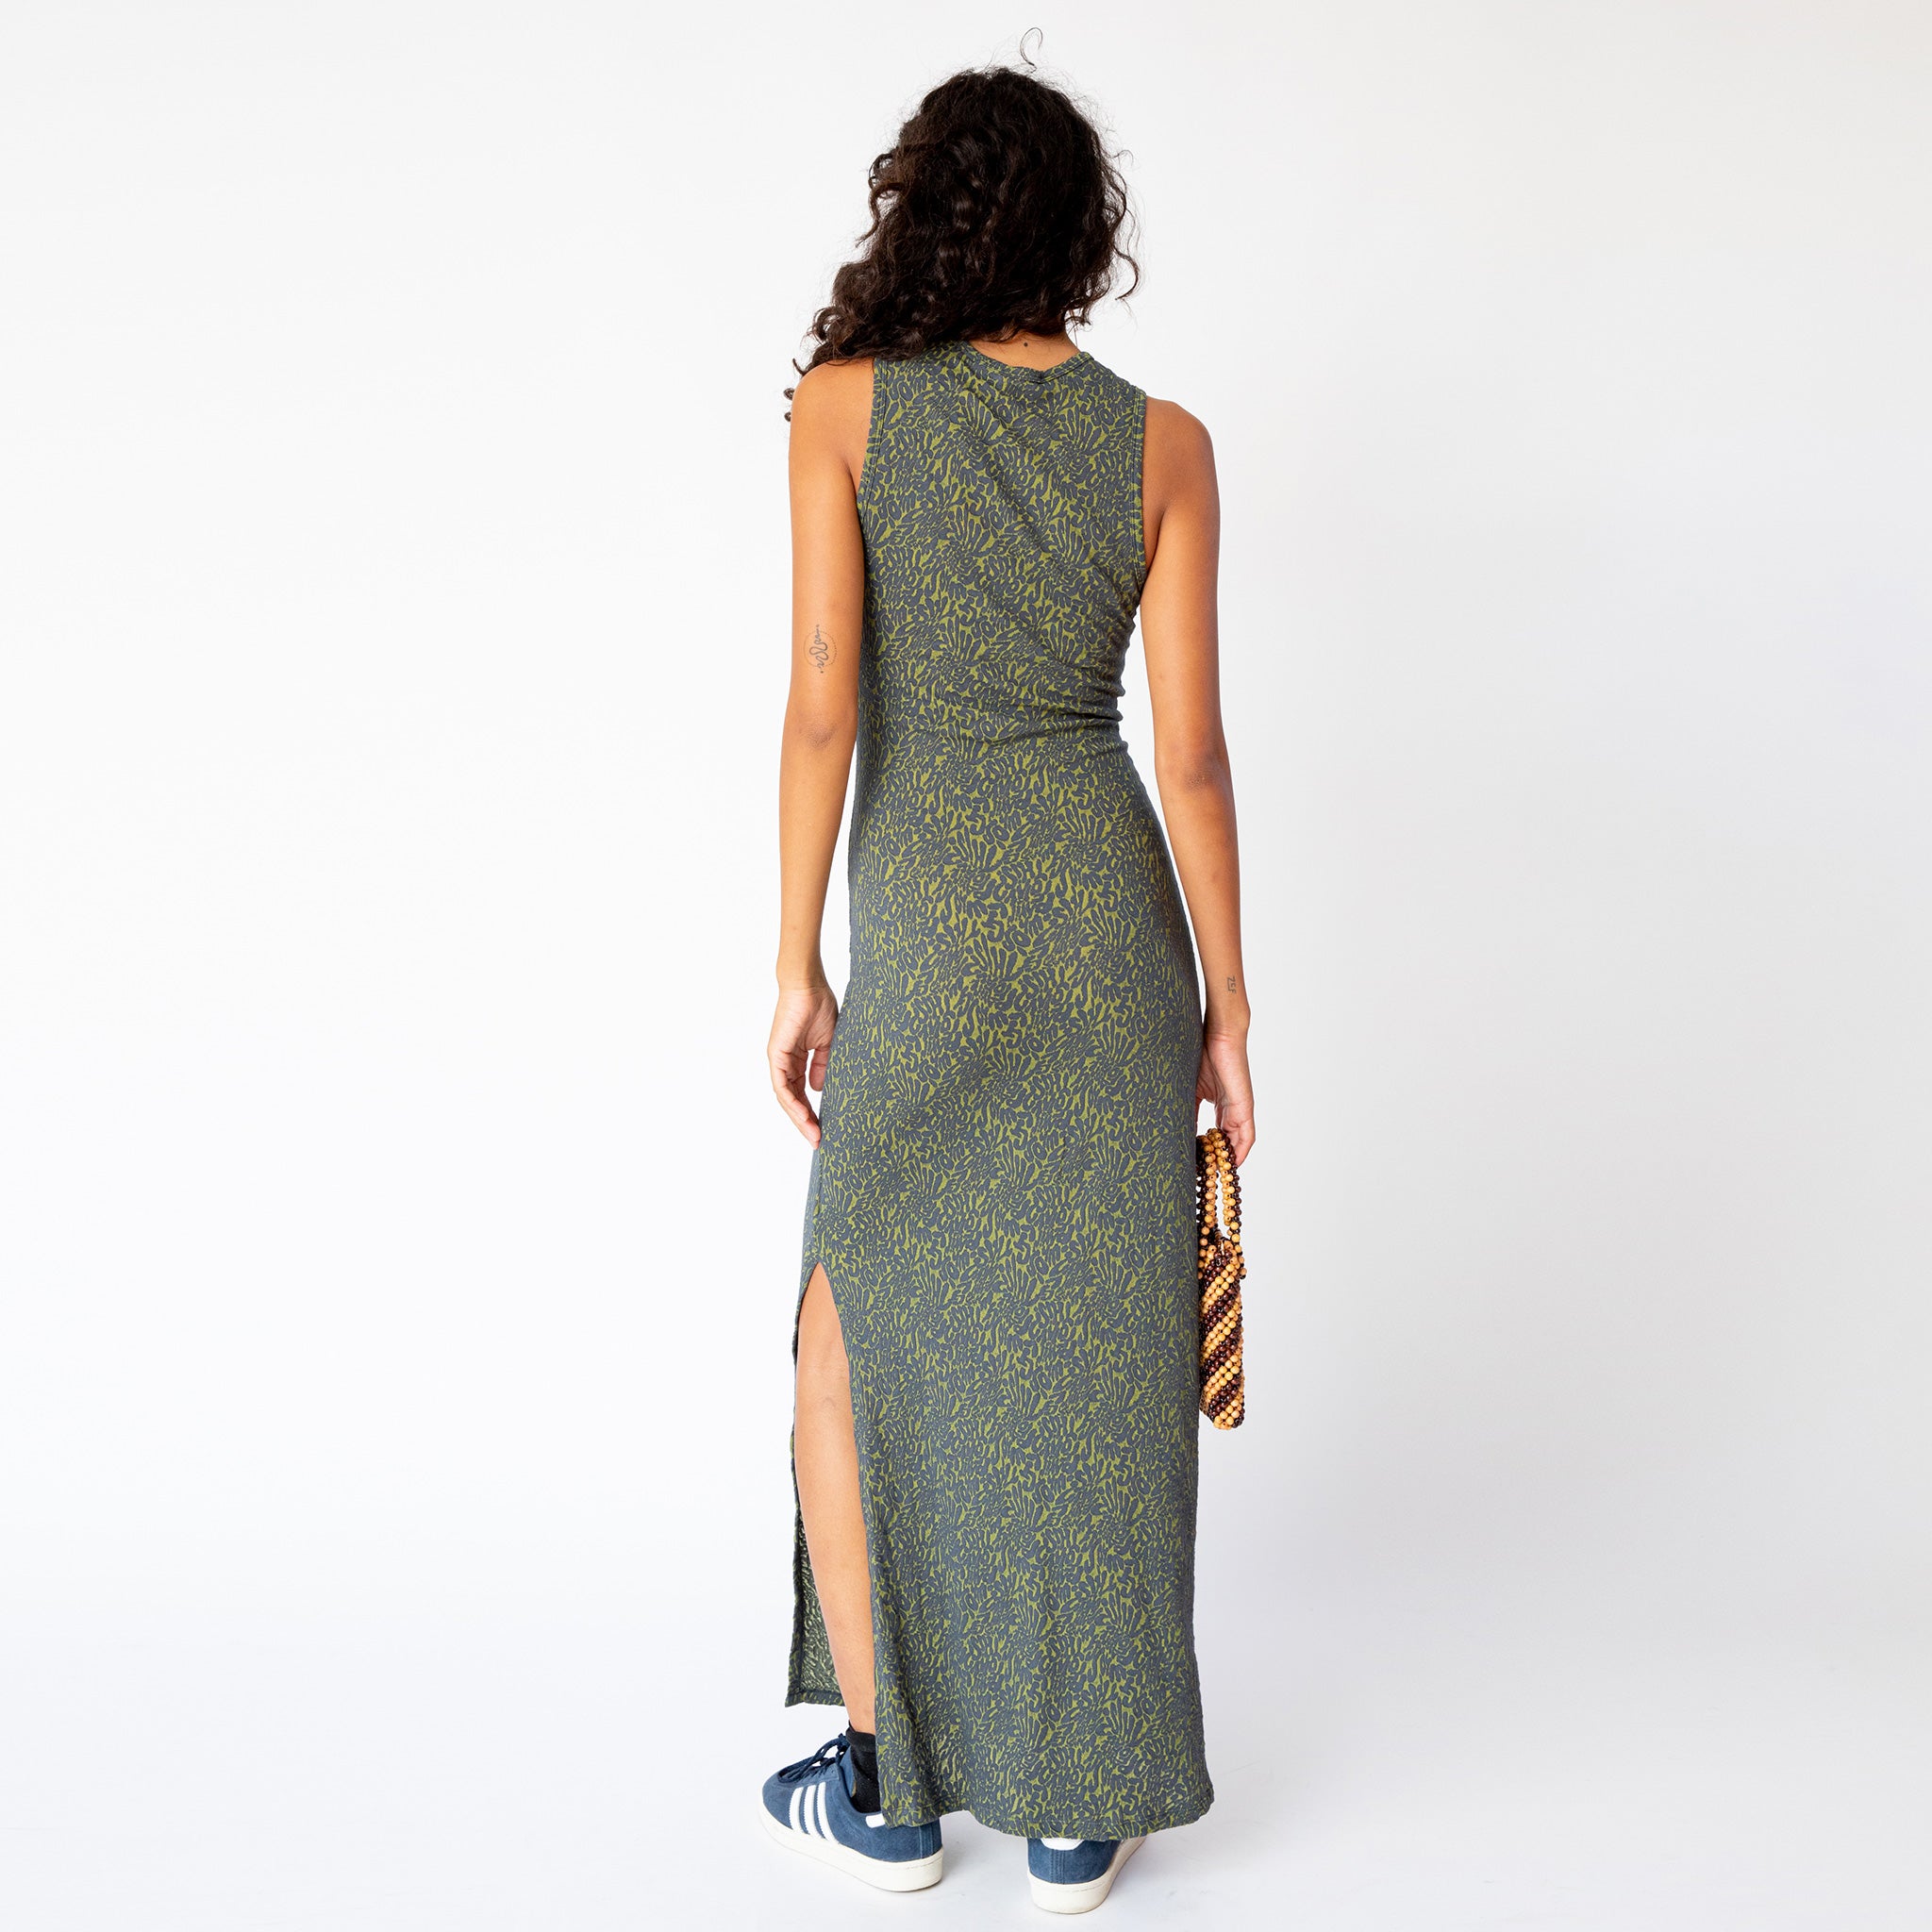 A model wears the form-fitting Shrunk Dress by Eckhaus Latta, a sleeveless full length casual dress in a green printed pattern, back view.